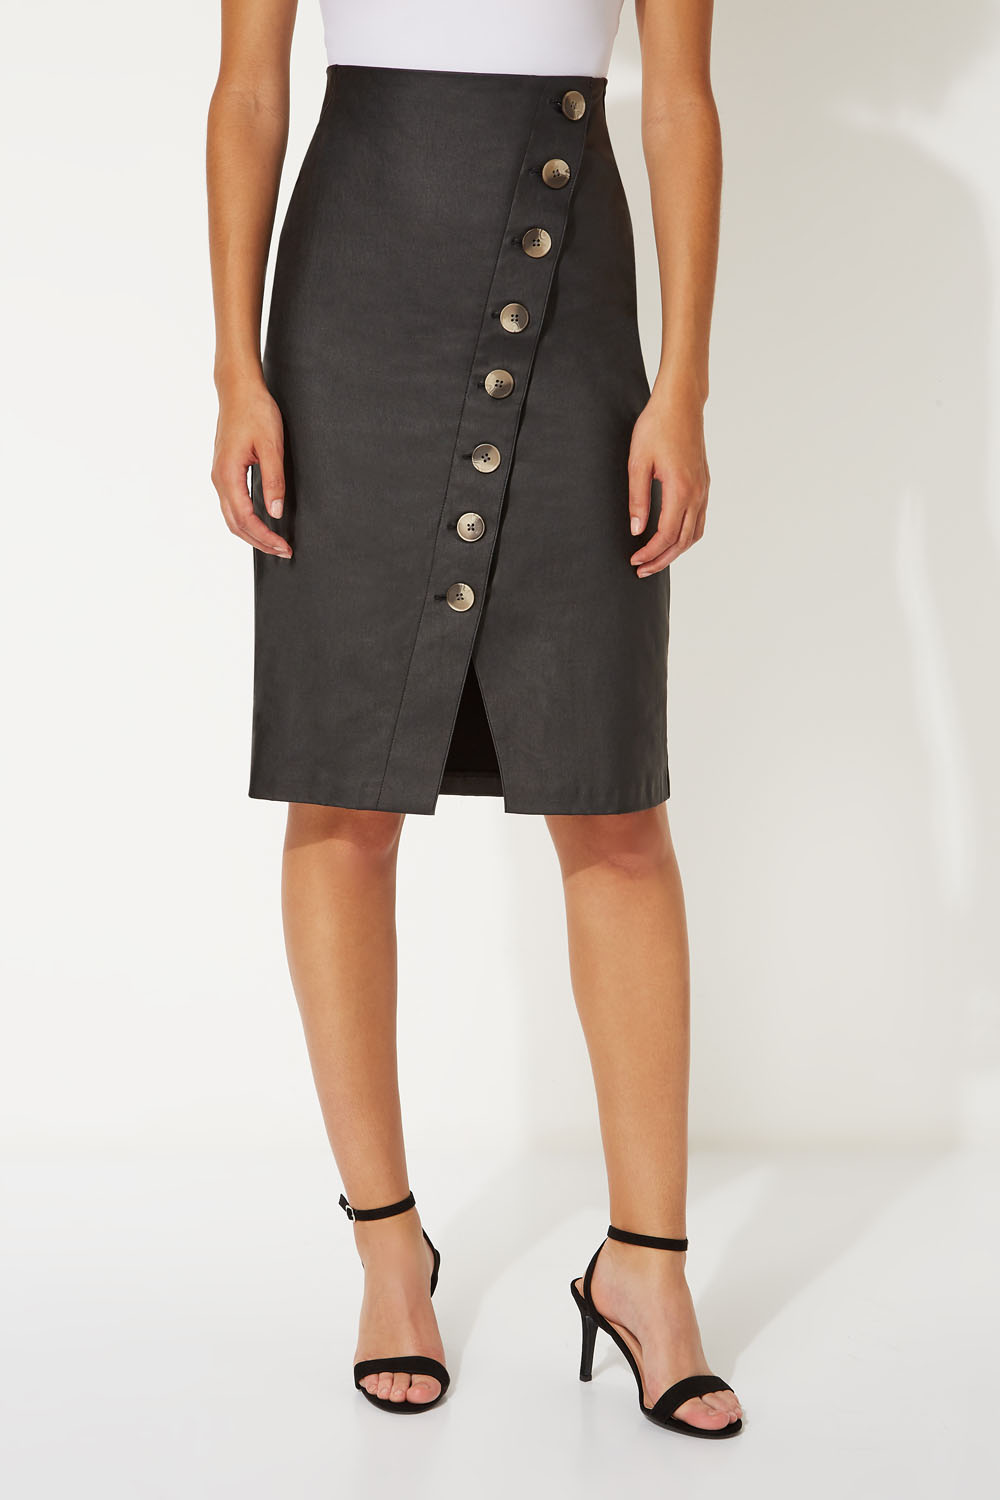 Black Faux Leather Button Midi Skirt, Image 2 of 7